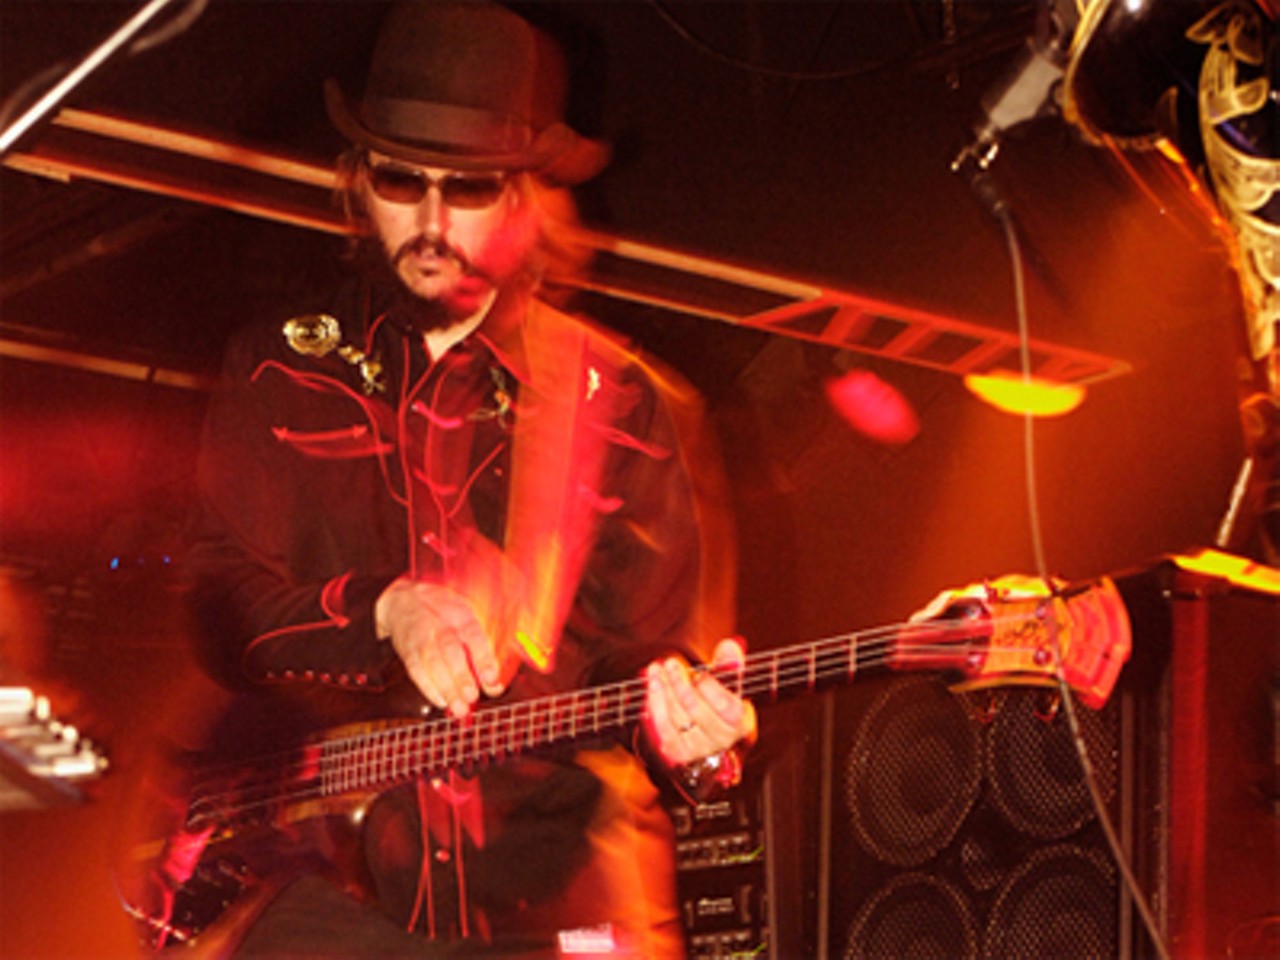 Les Claypool at the now-closed Mississippi Nights in St. Louis.